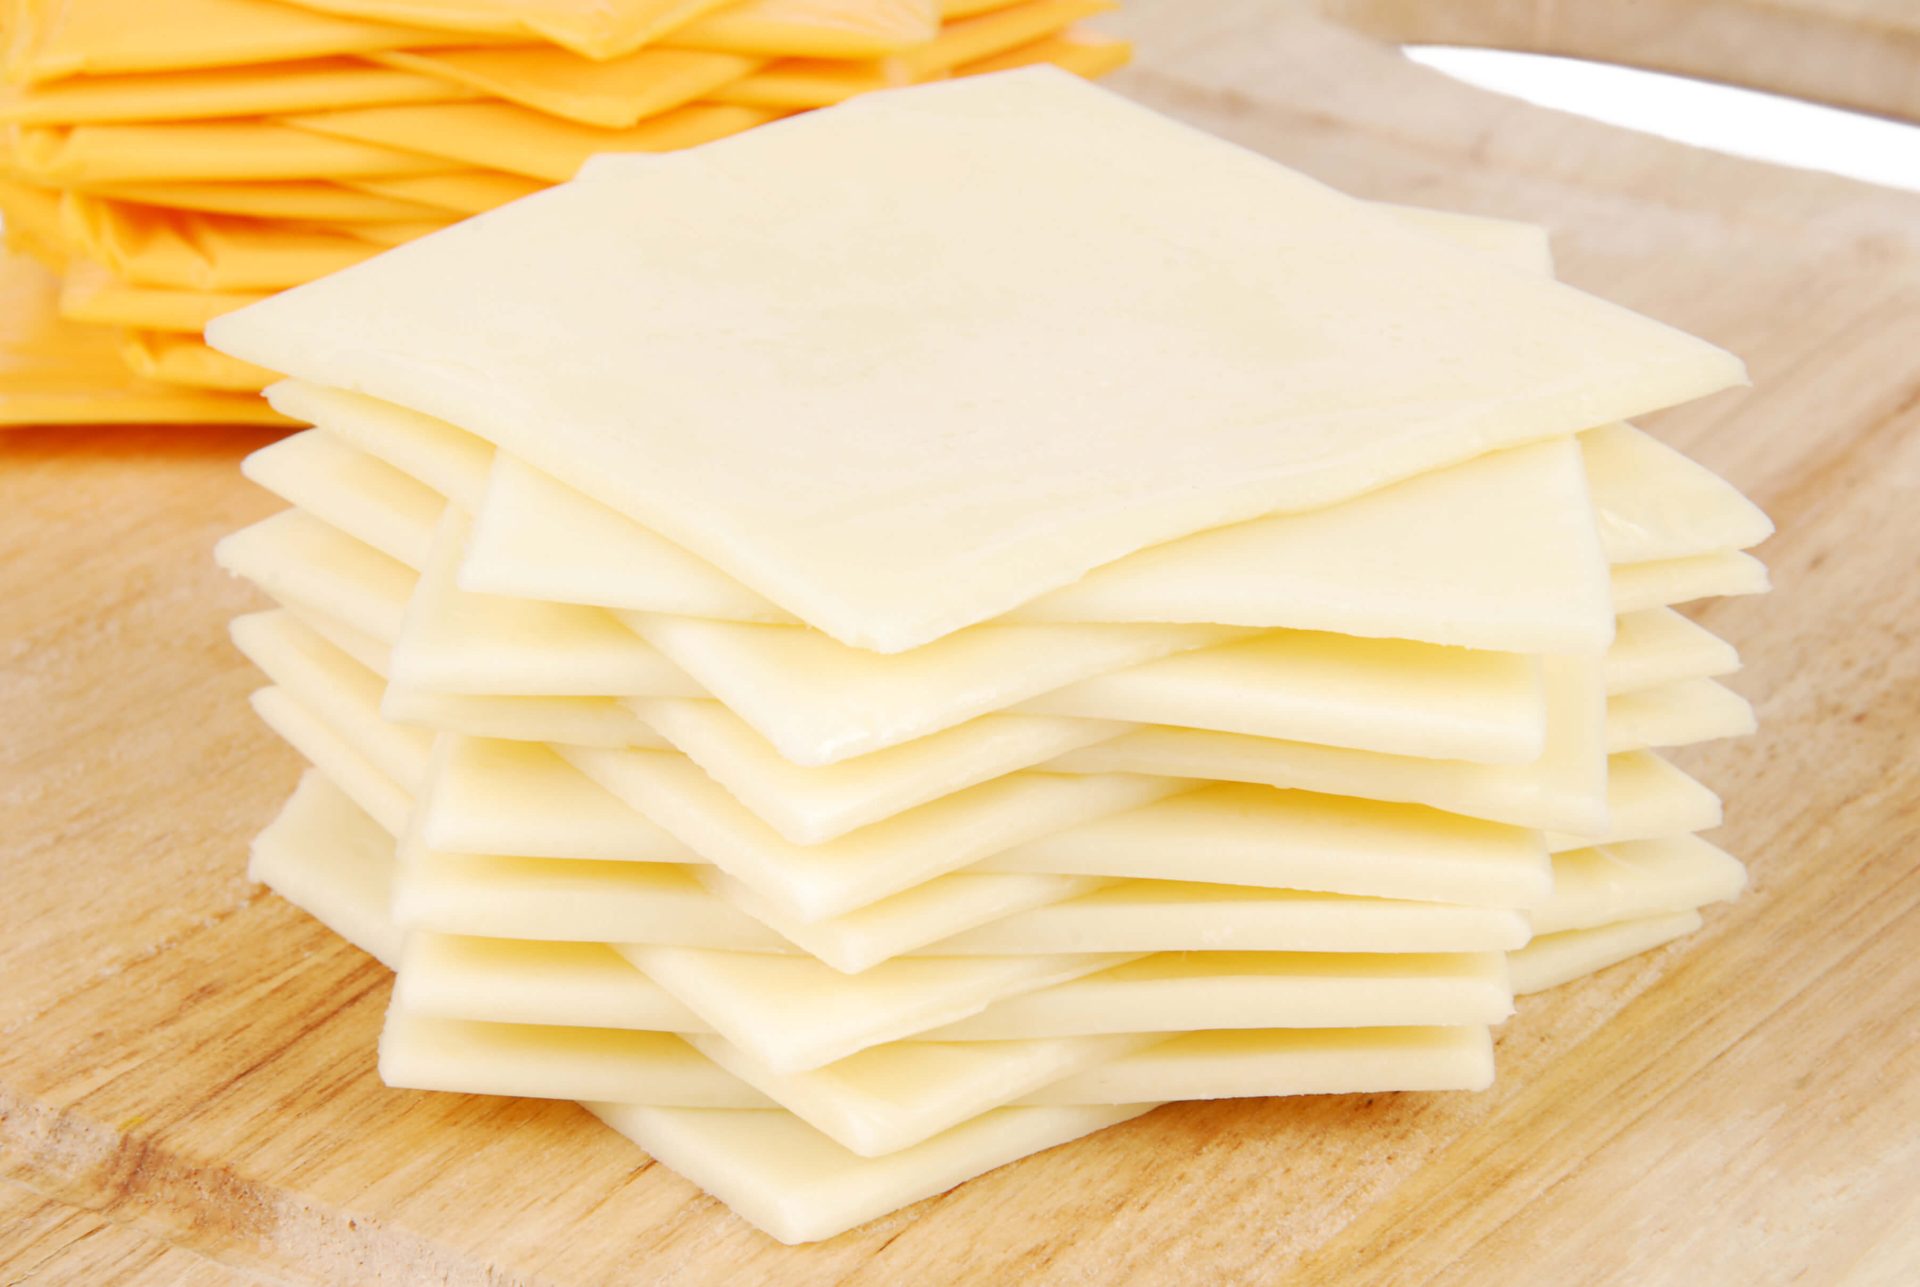 white american cheese substitute, american cheese substitute, substitute for white american cheese, substitute for american cheese, substitute american cheese, white cheddar cheese substitute, substitute for american cheese